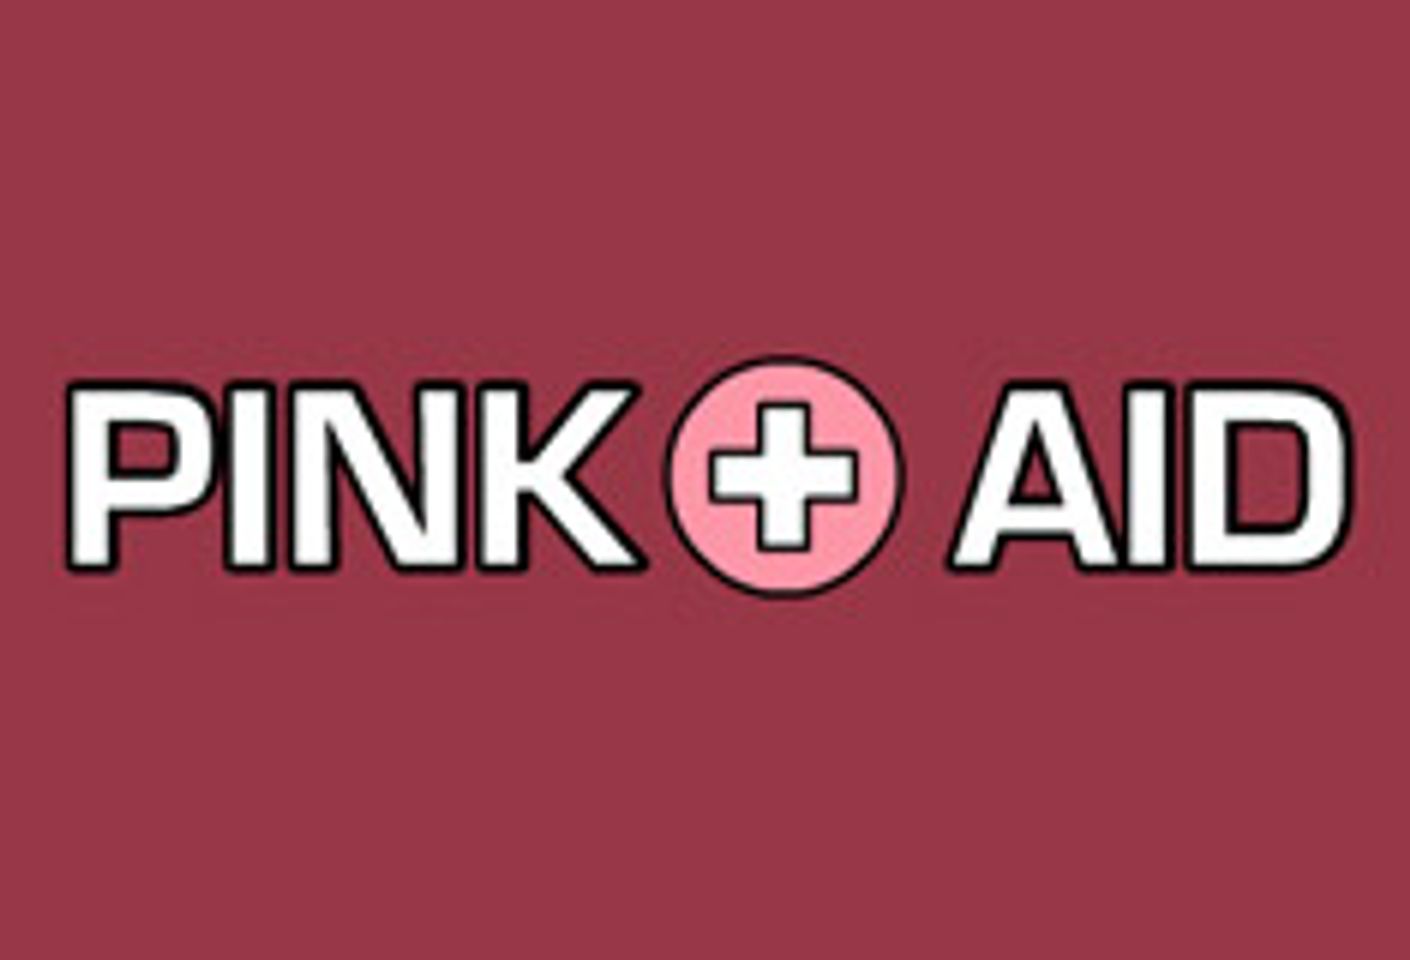 PINK+AID Charity Porn DVD Now Available